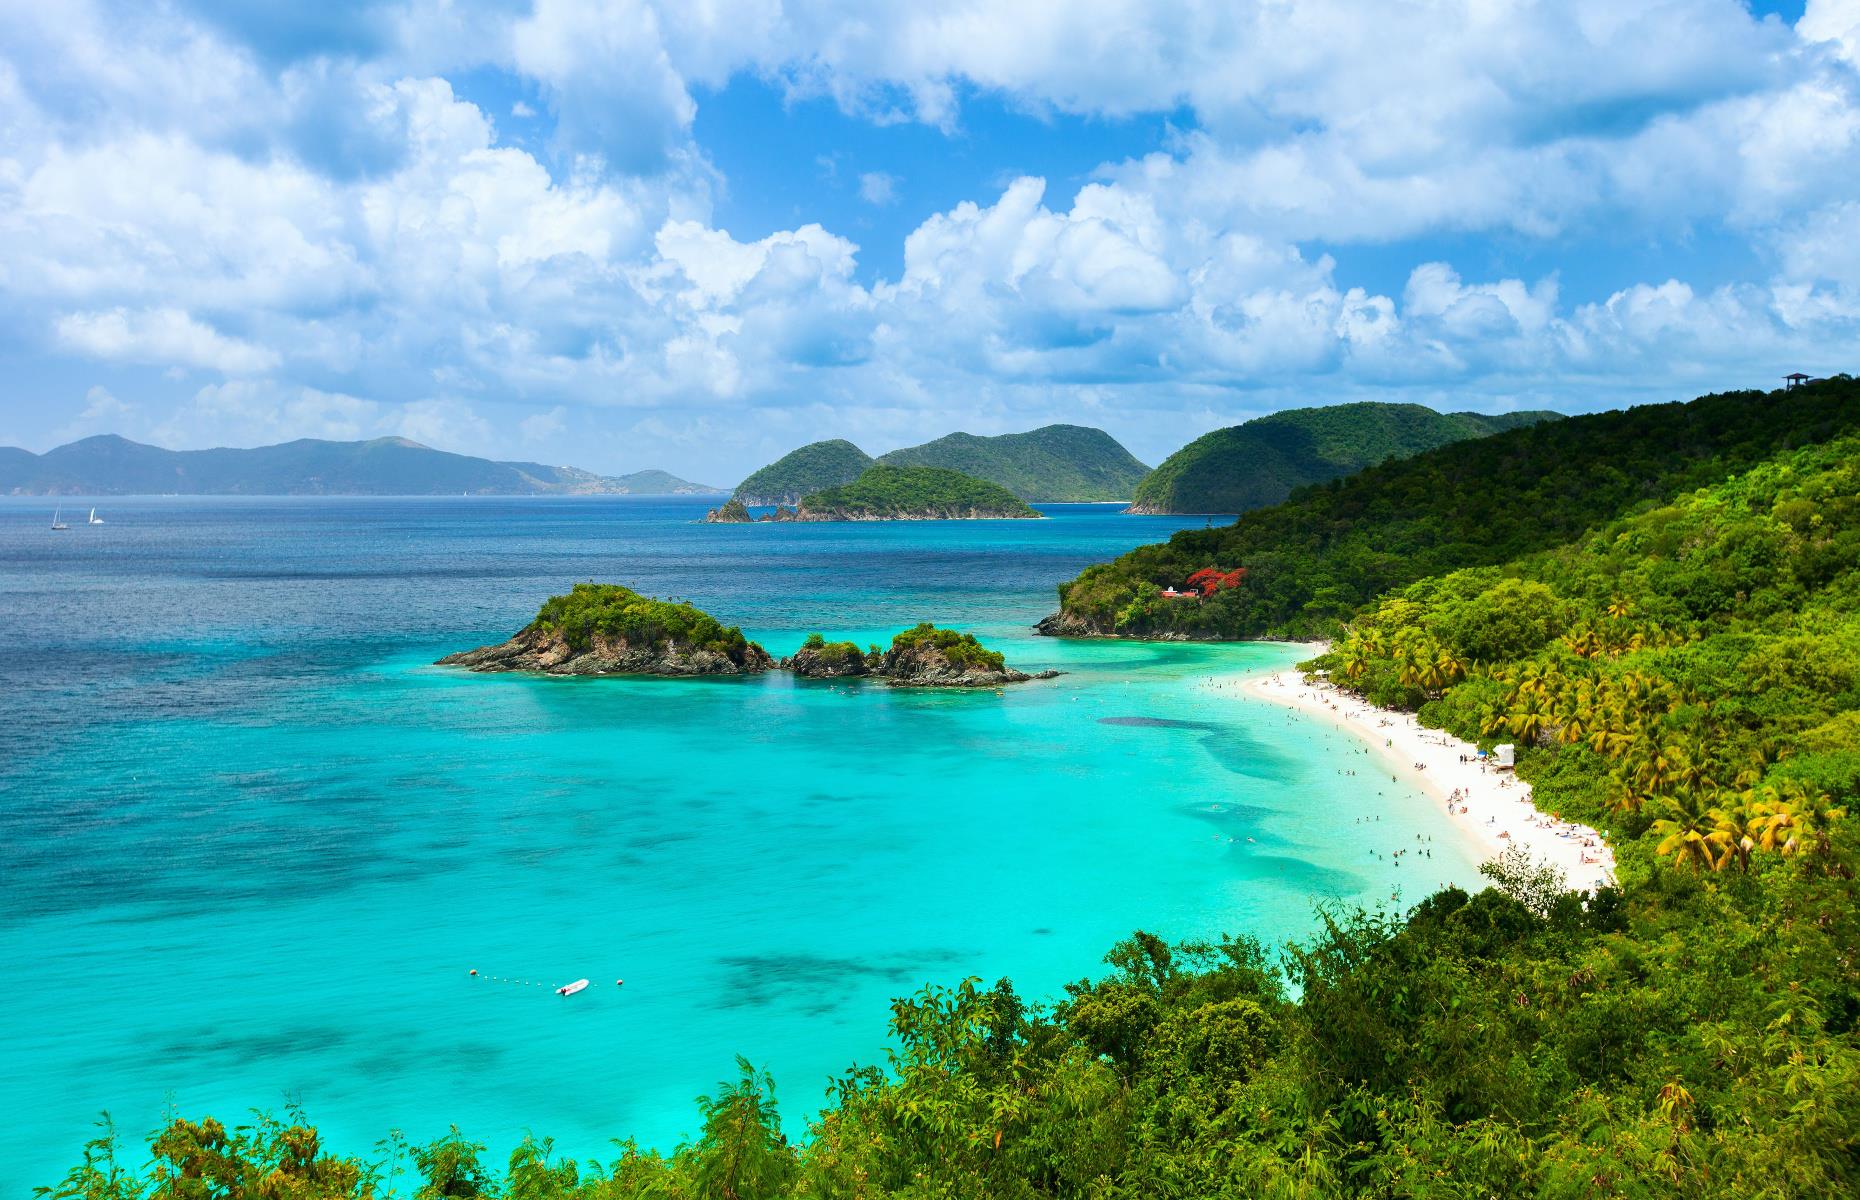 <p>America’s national parks aren’t all in the continental US – <a href="https://www.nps.gov/viis/index.htm">this park</a> takes up about two thirds of the island of St. John as well as nearby Hassel Island in the Virgin Islands. The cultural history on St. John runs deep, with petroglyph sites created by the Indigenous Taino peoples and colonial-era plantation ruins on the island. Those looking for natural stimulation can also get their fill with sandy white beaches, hiking trails and opportunities to snorkel among coral reefs.</p>